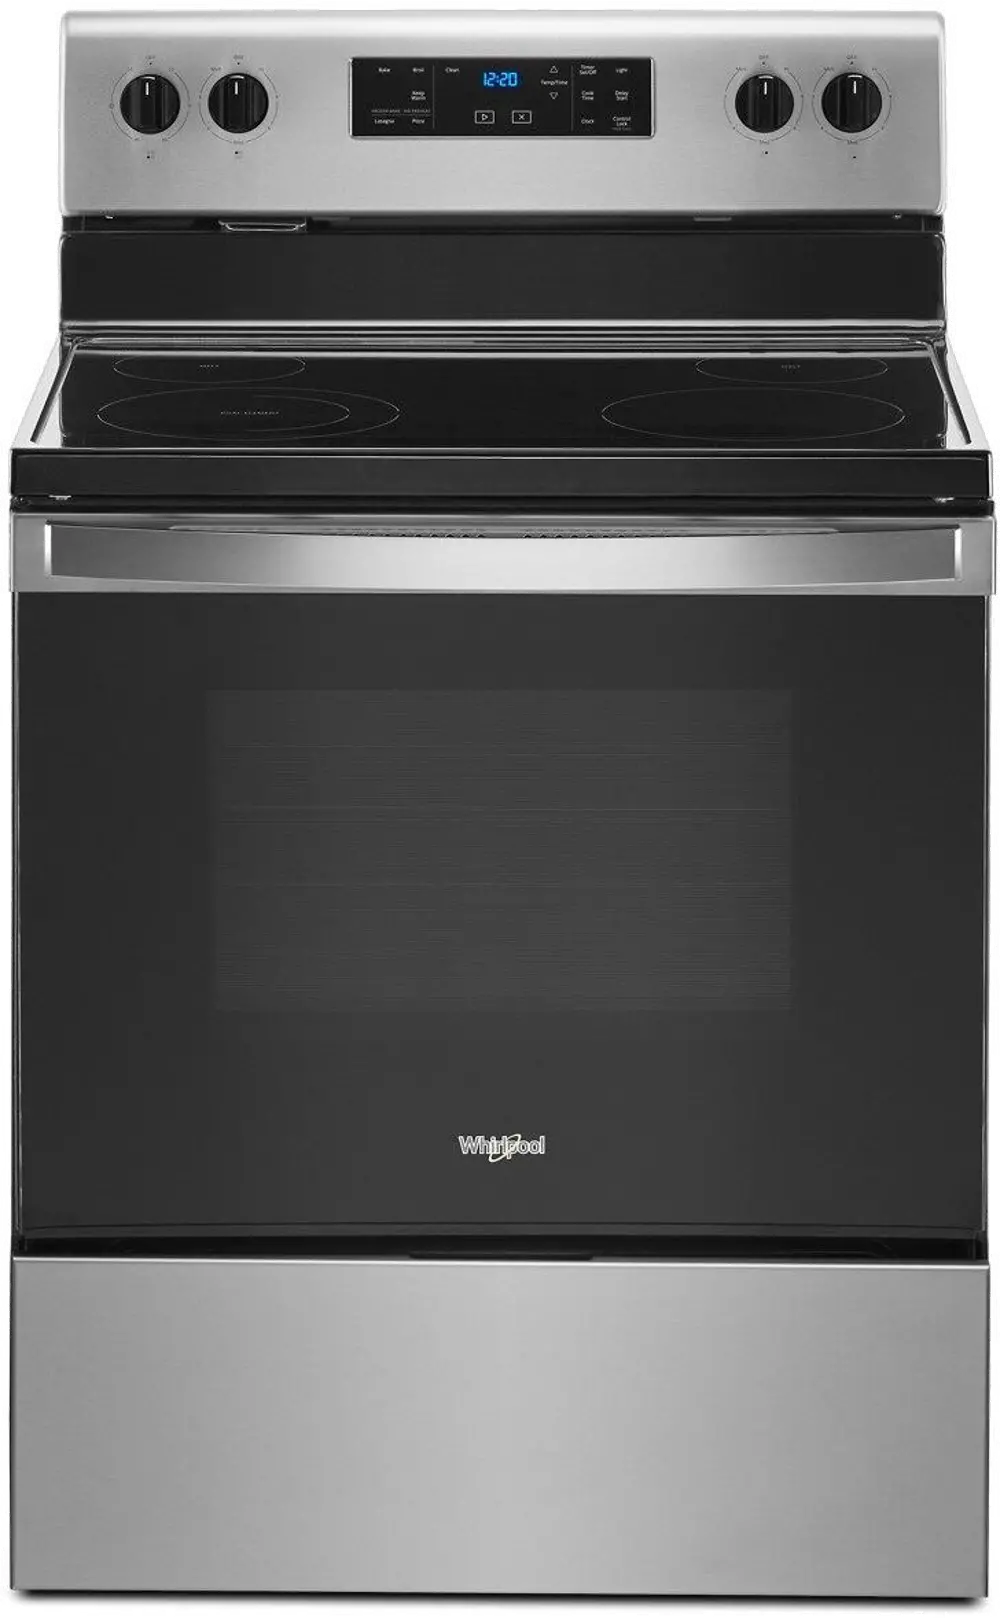 WFE515S0JS Whirlpool 5.3 cu ft Electric Range - Stainless Steel-1